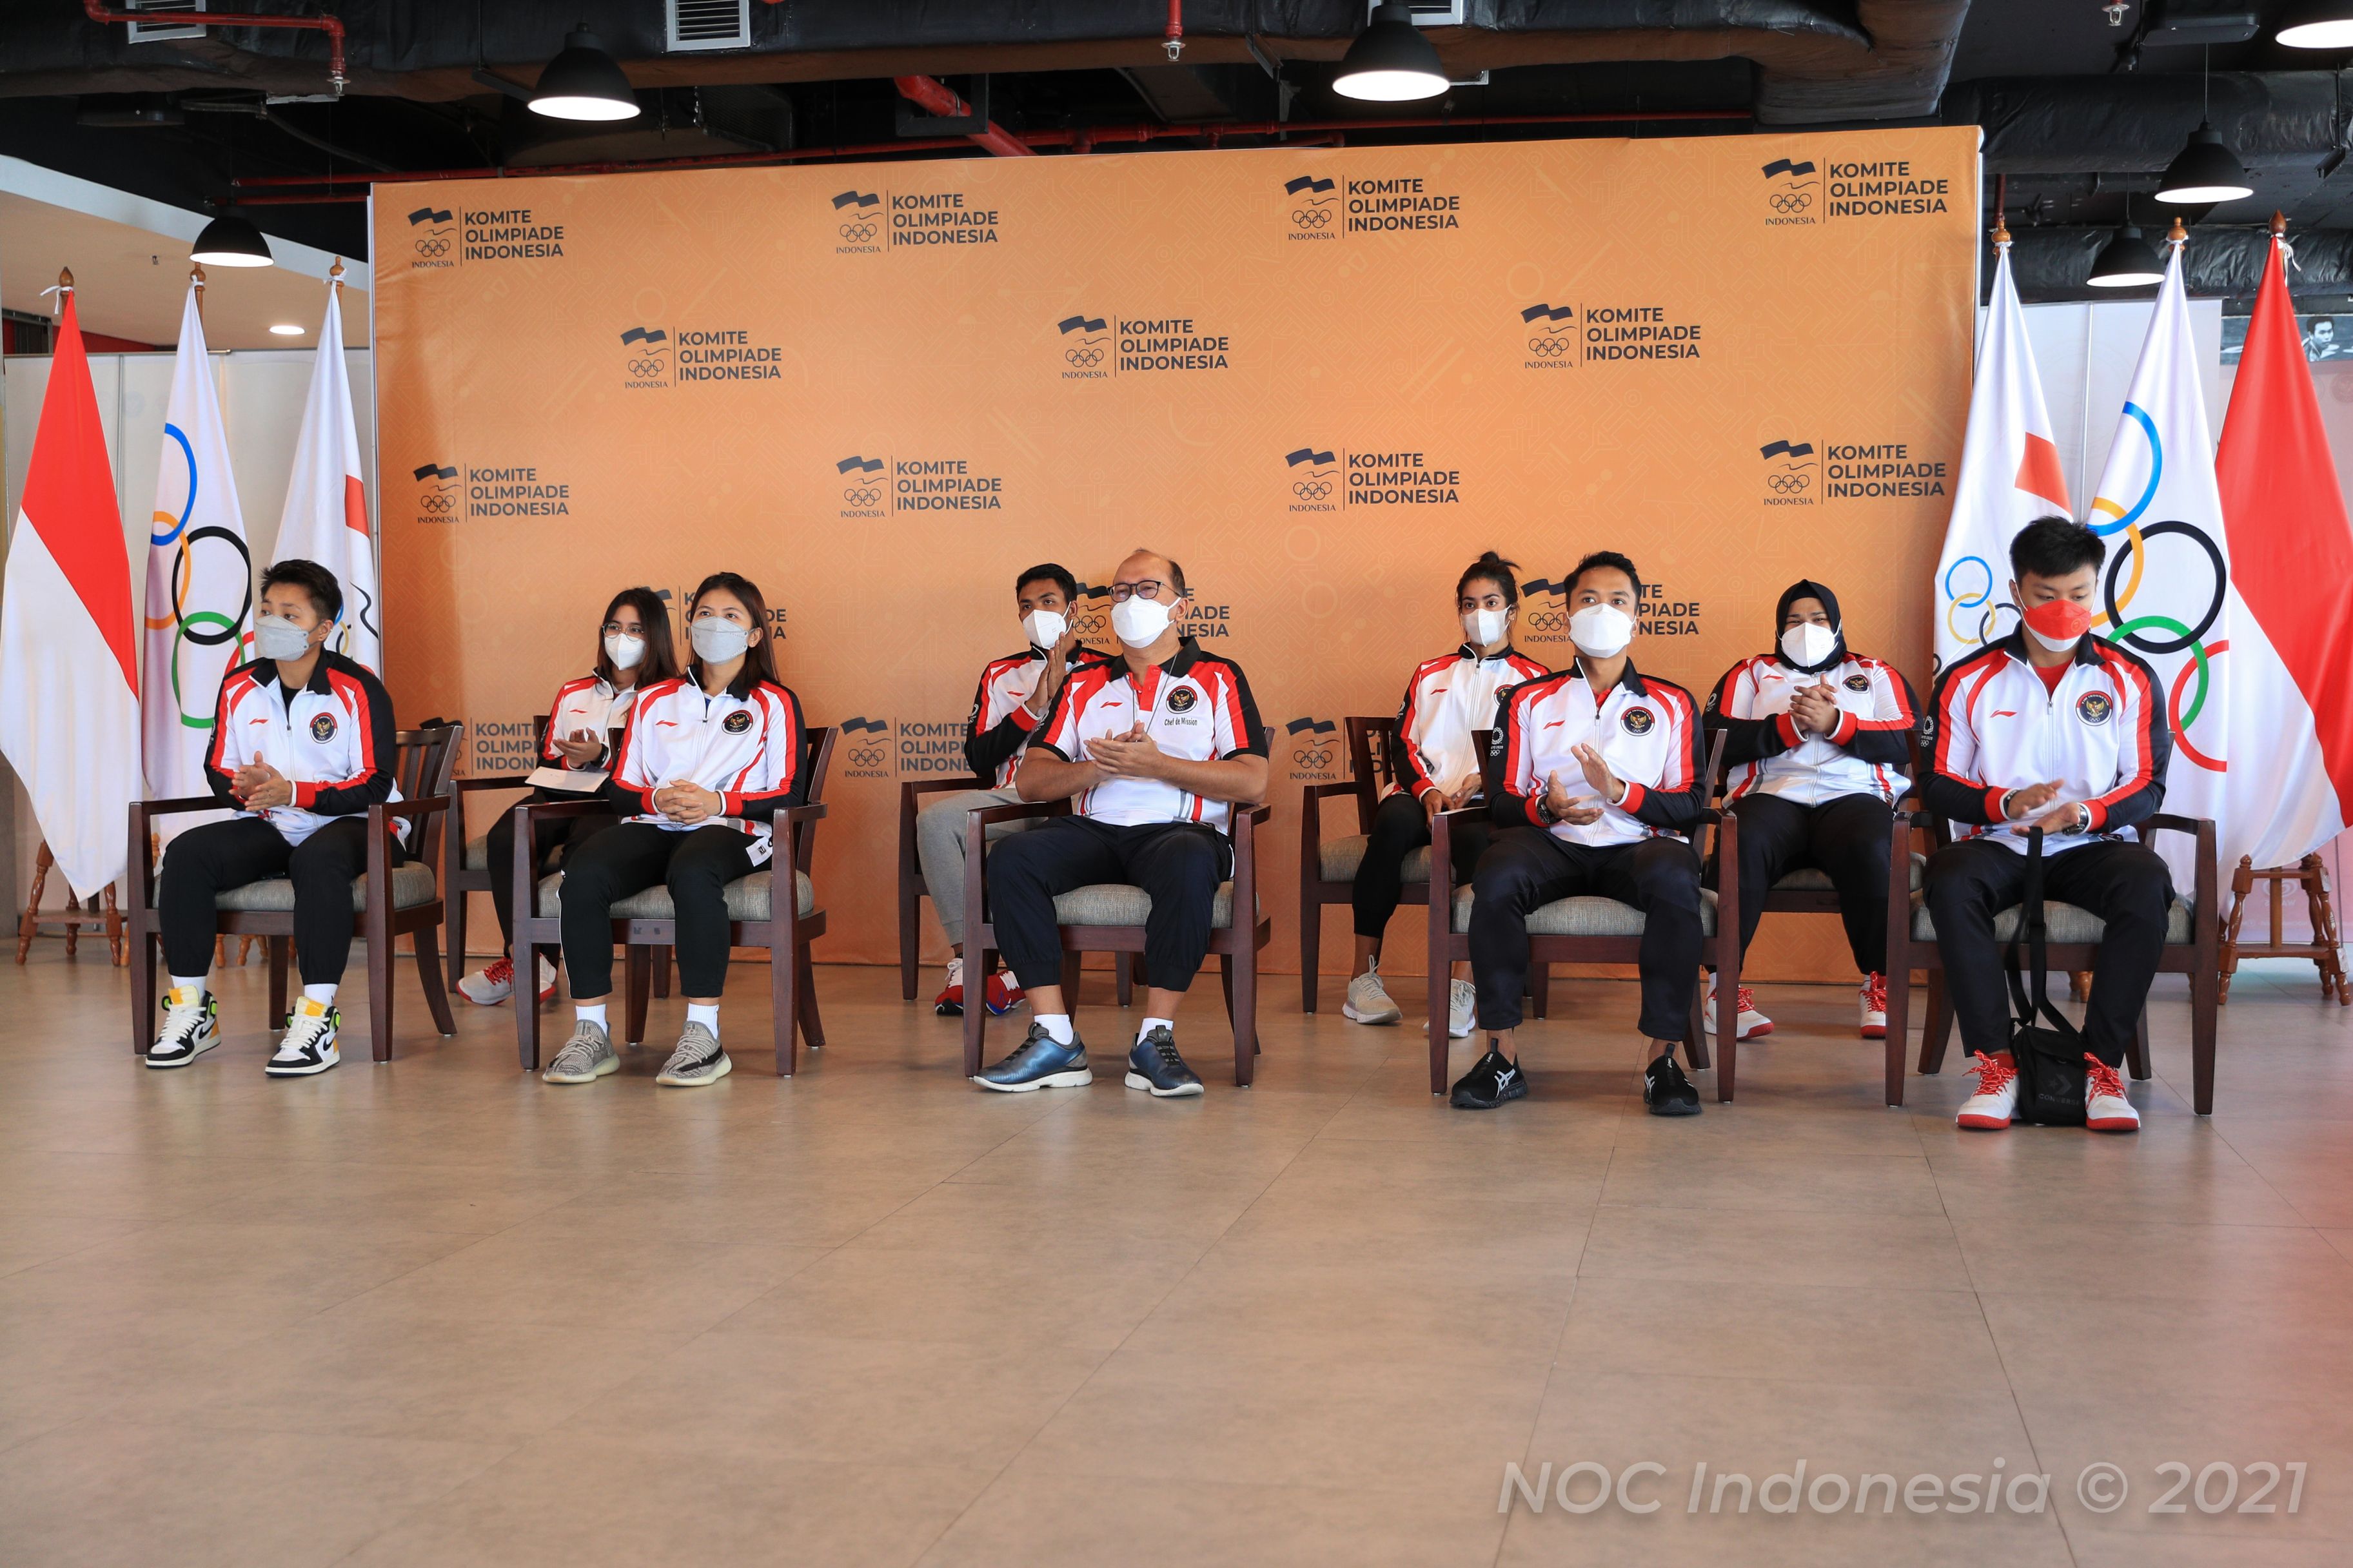 Indonesia Olympic Commitee - Team Indonesia CdM: "Athletes' health is the priority"